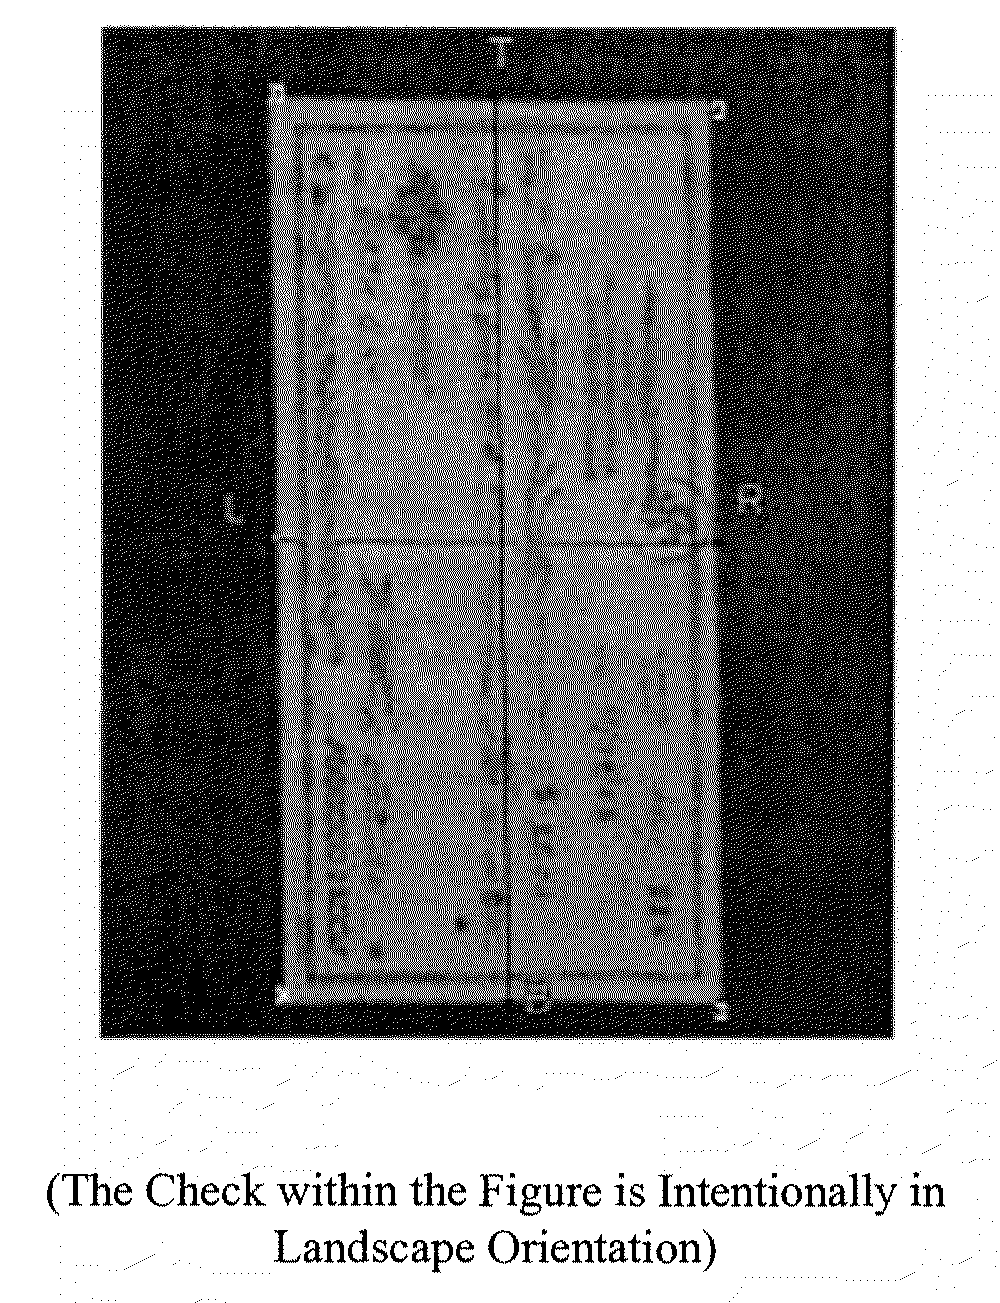 Methods for mobile image capture and processing of checks